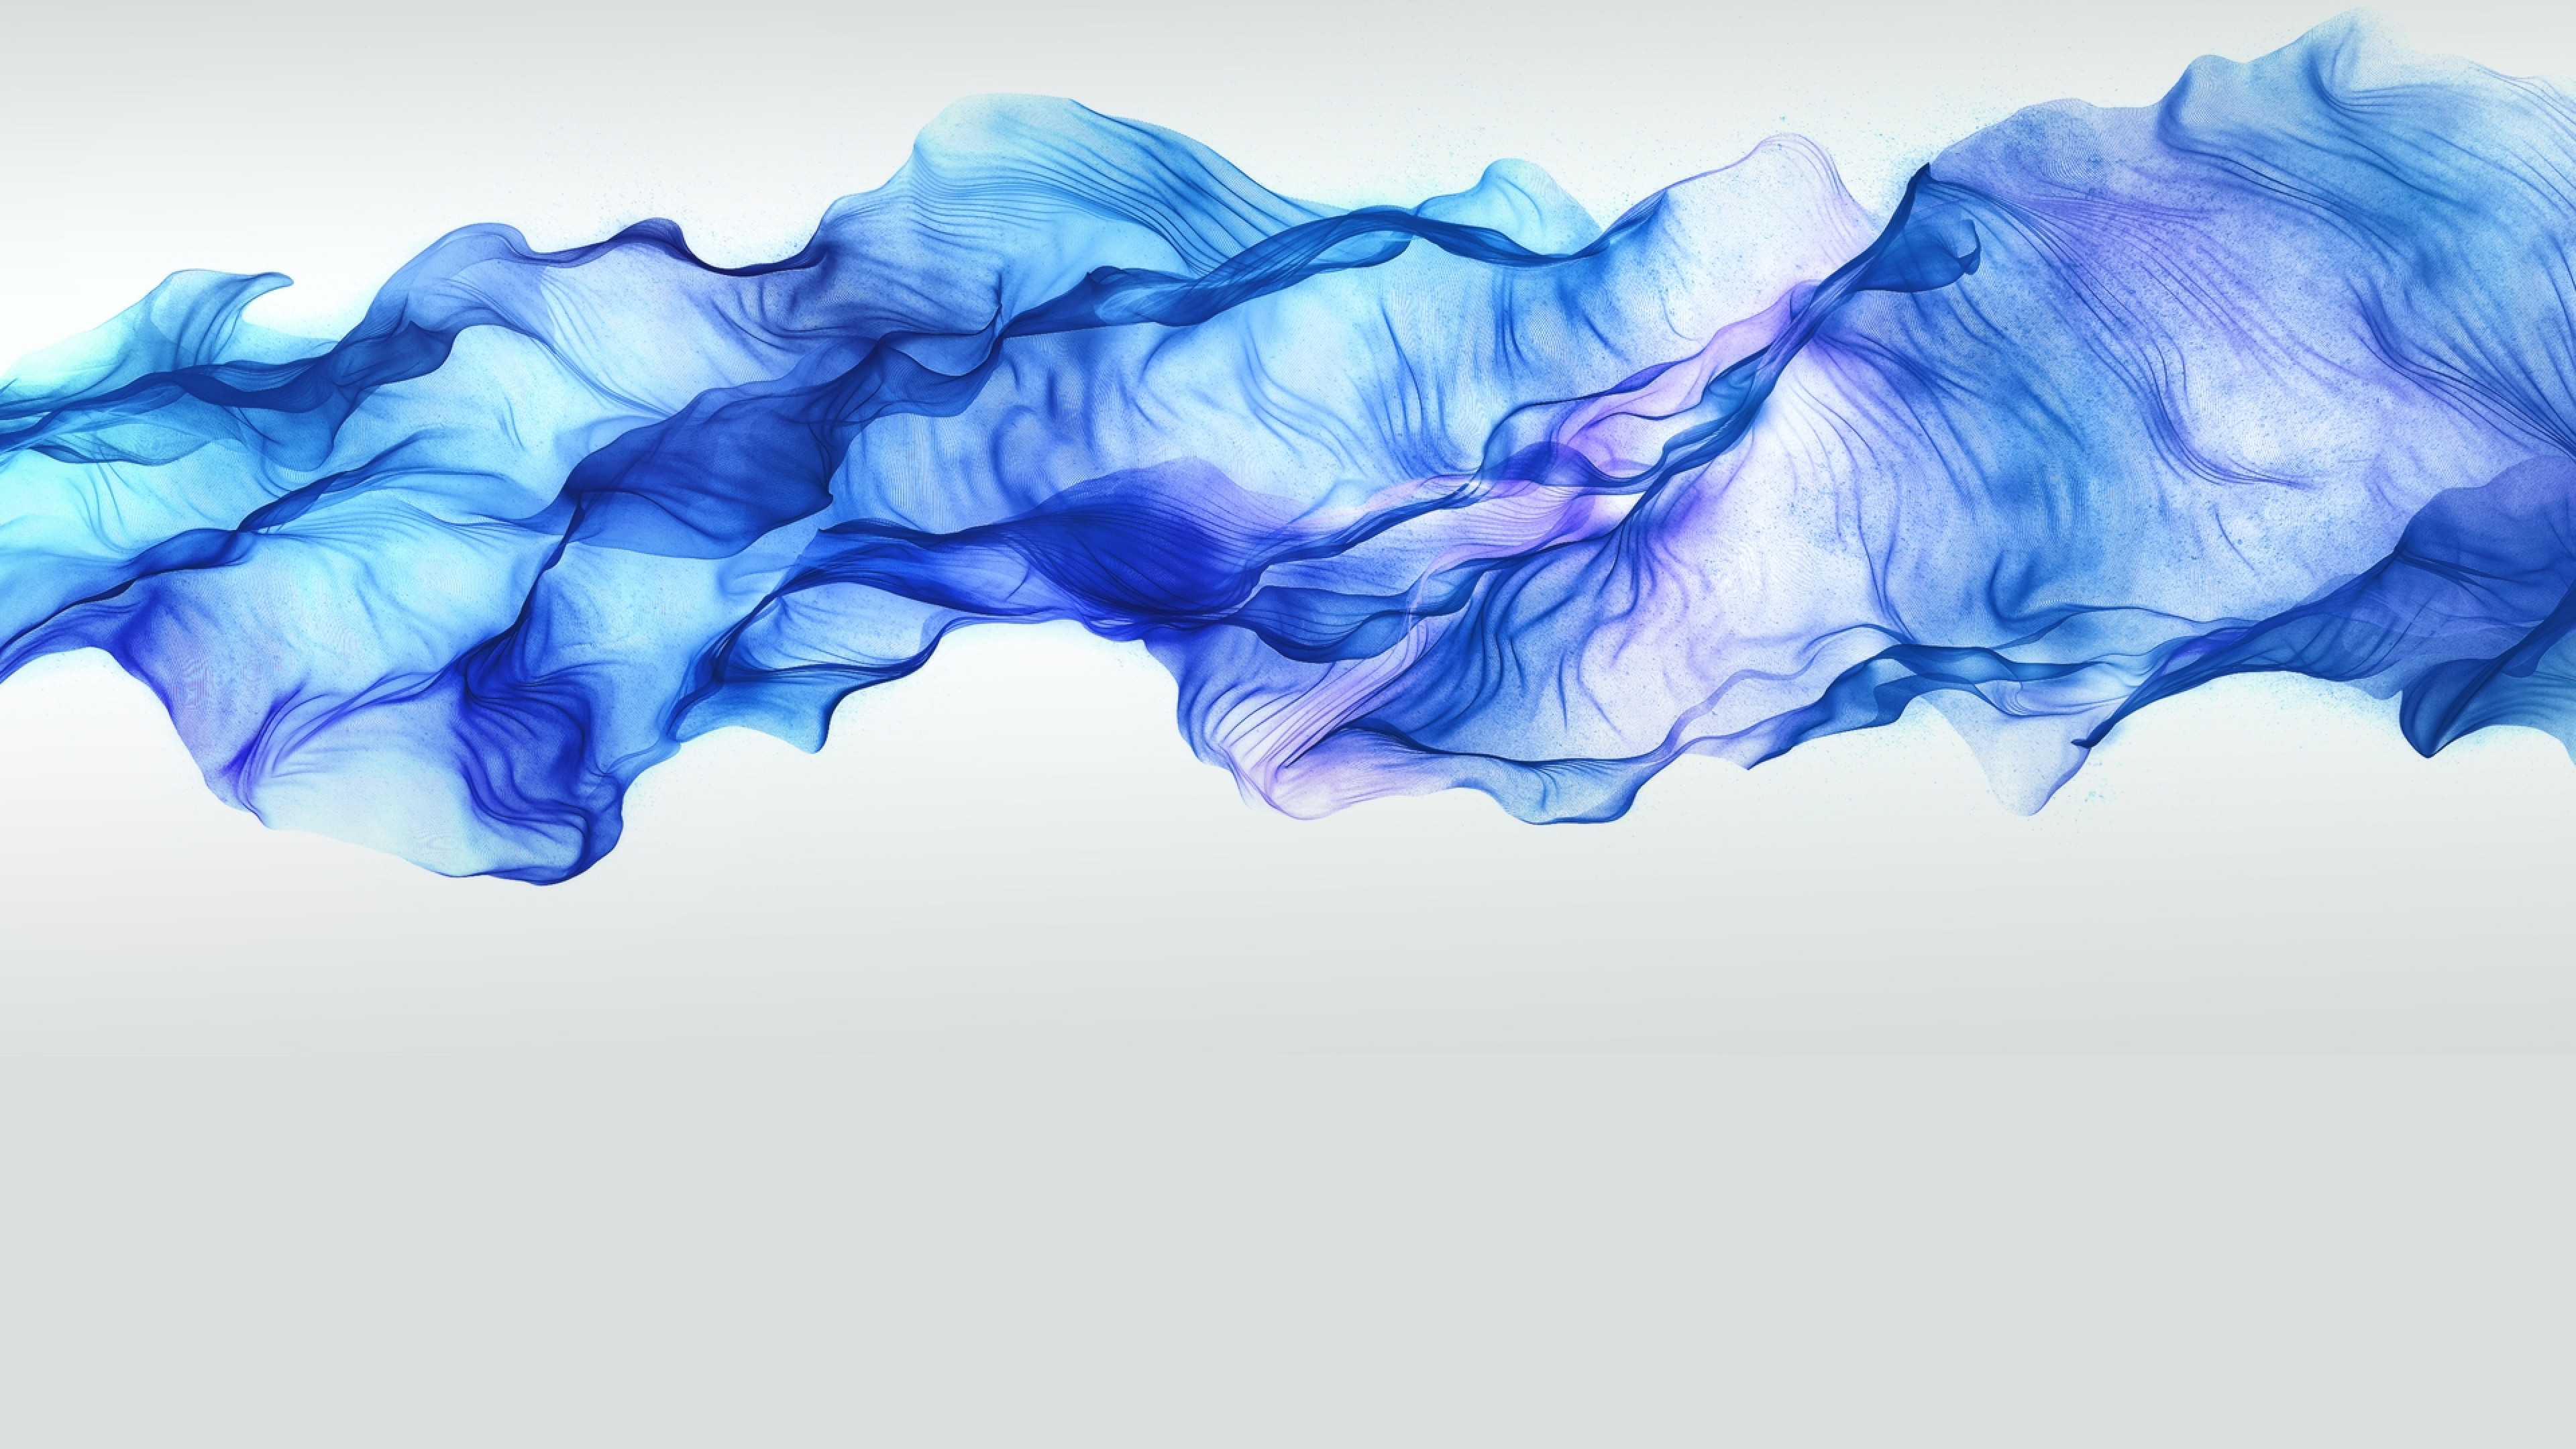 Dark Blue Smoke Cloud Wallpaper Background And Picture For Free Download   Pngtree